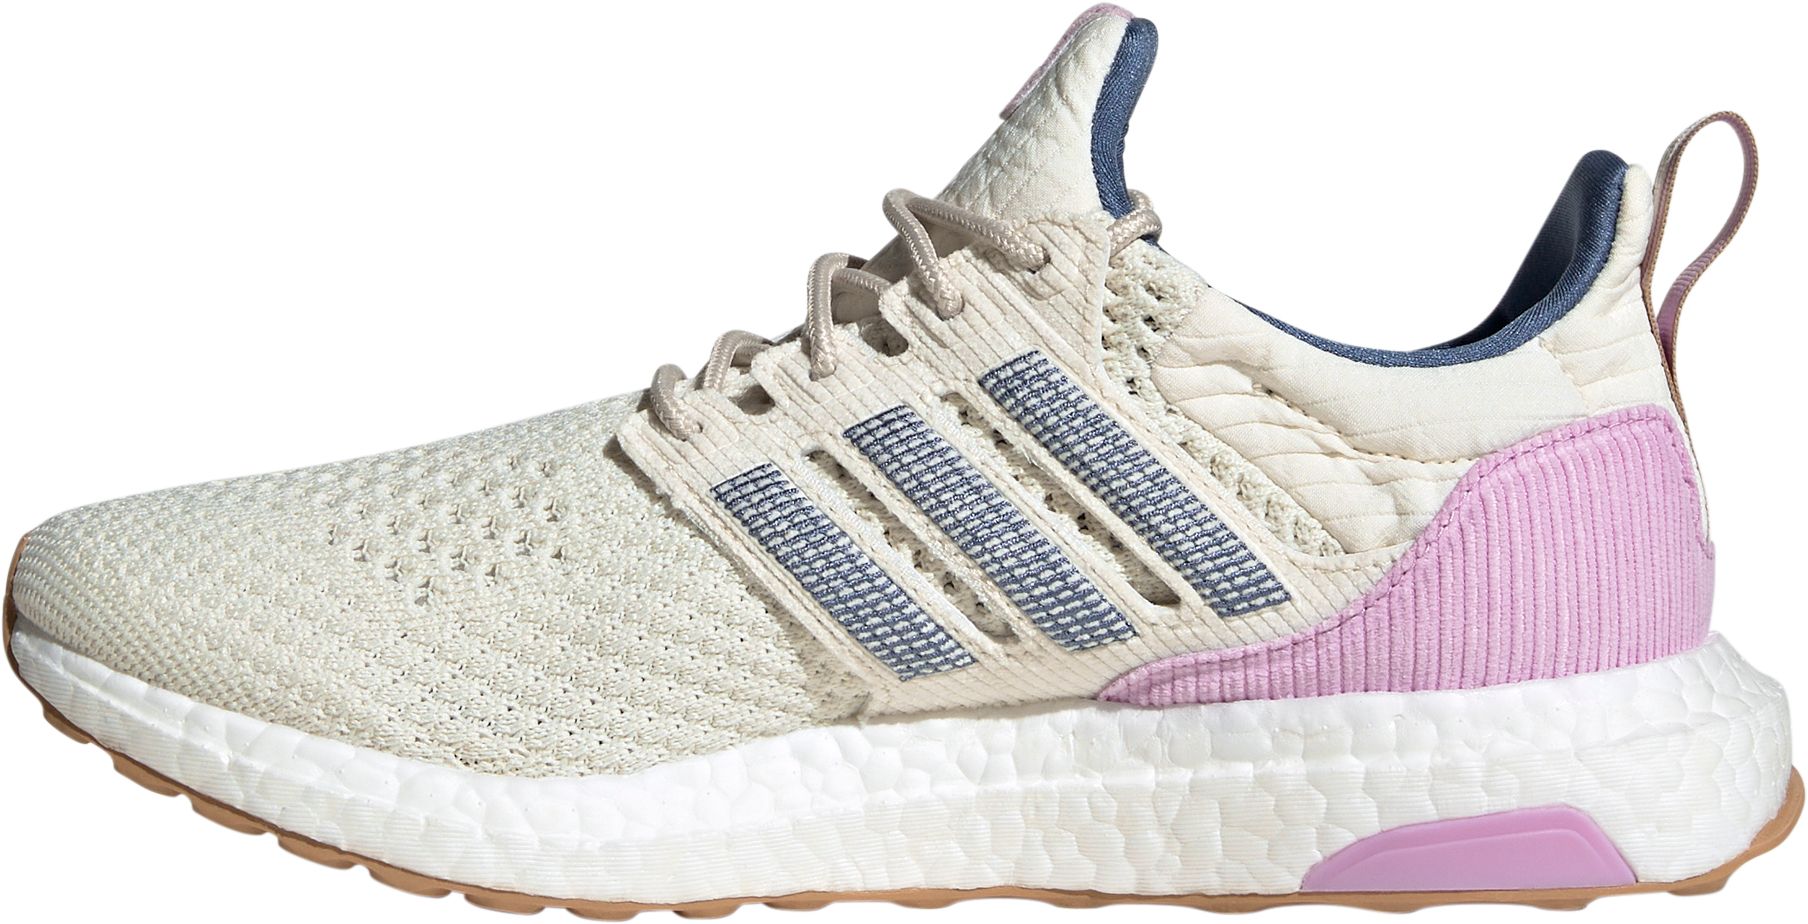 Adidas Women's Ultraboost 1.0 Shoes | The Market Place